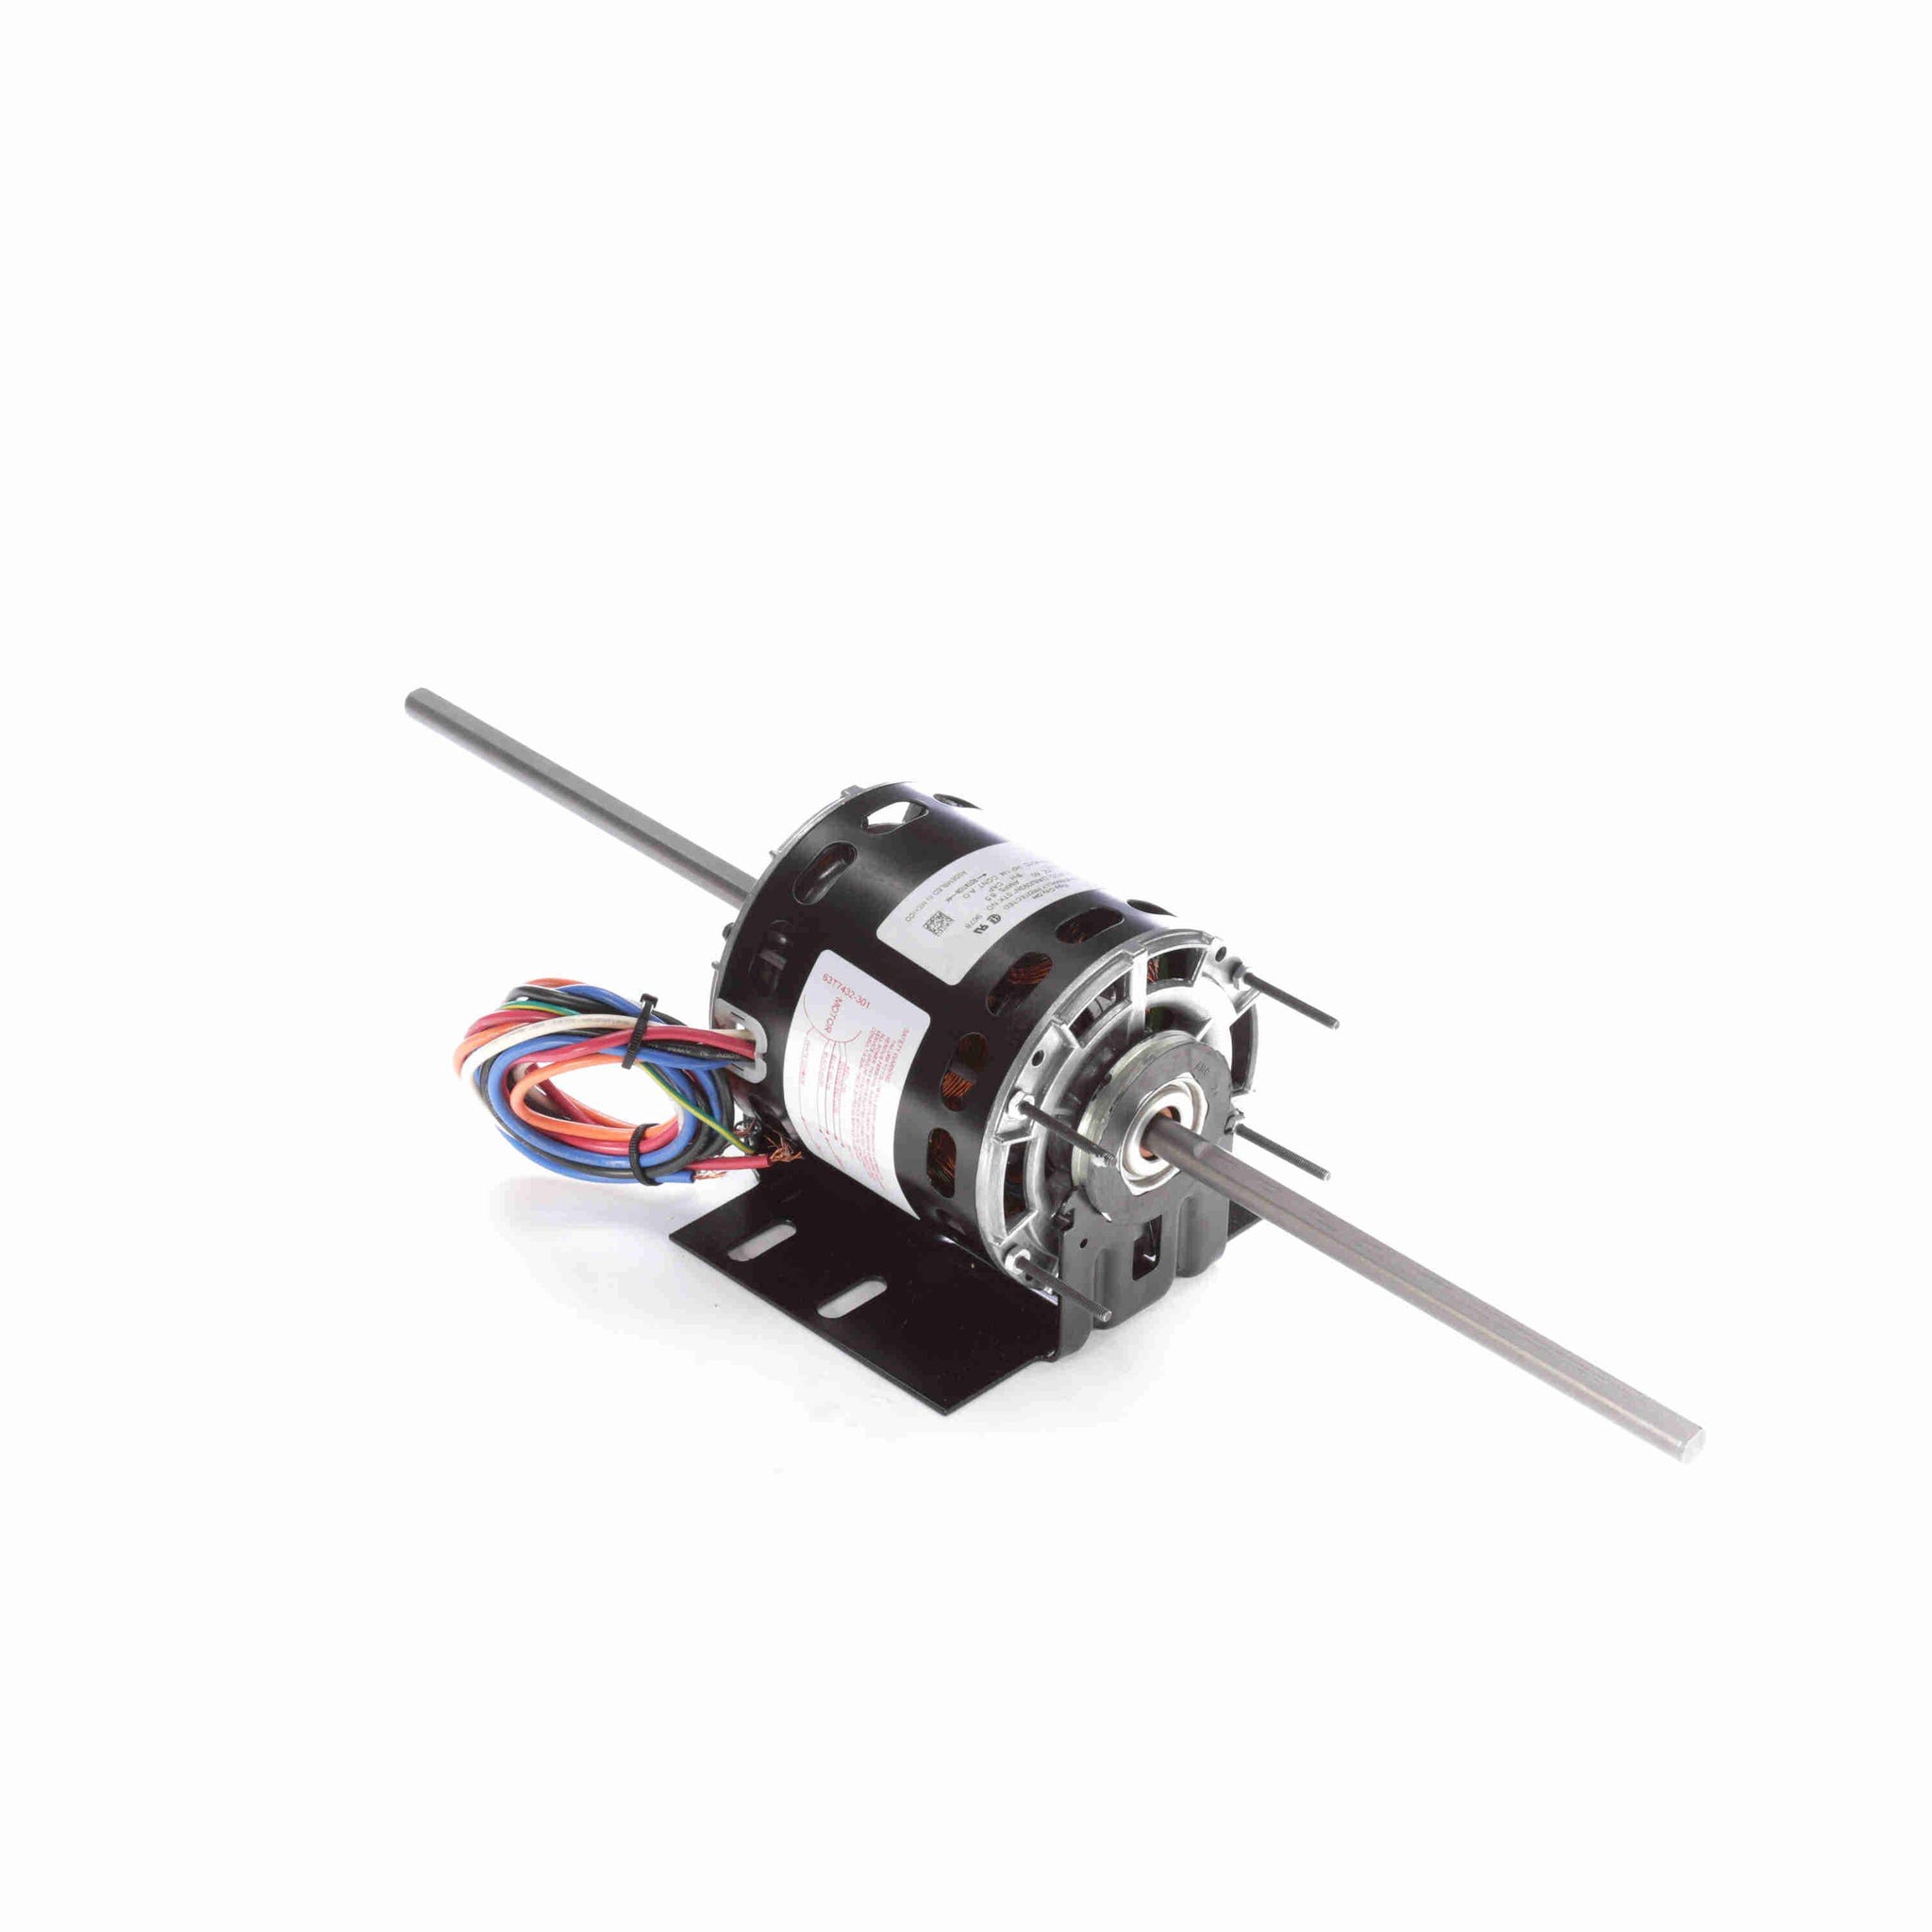 9678 -  1/4 HP Fan Coil / Room Air Conditioner Motor, 1050 RPM, 4 Speed, 115 Volts, 42 Frame, OAO - Hardware & Moreee